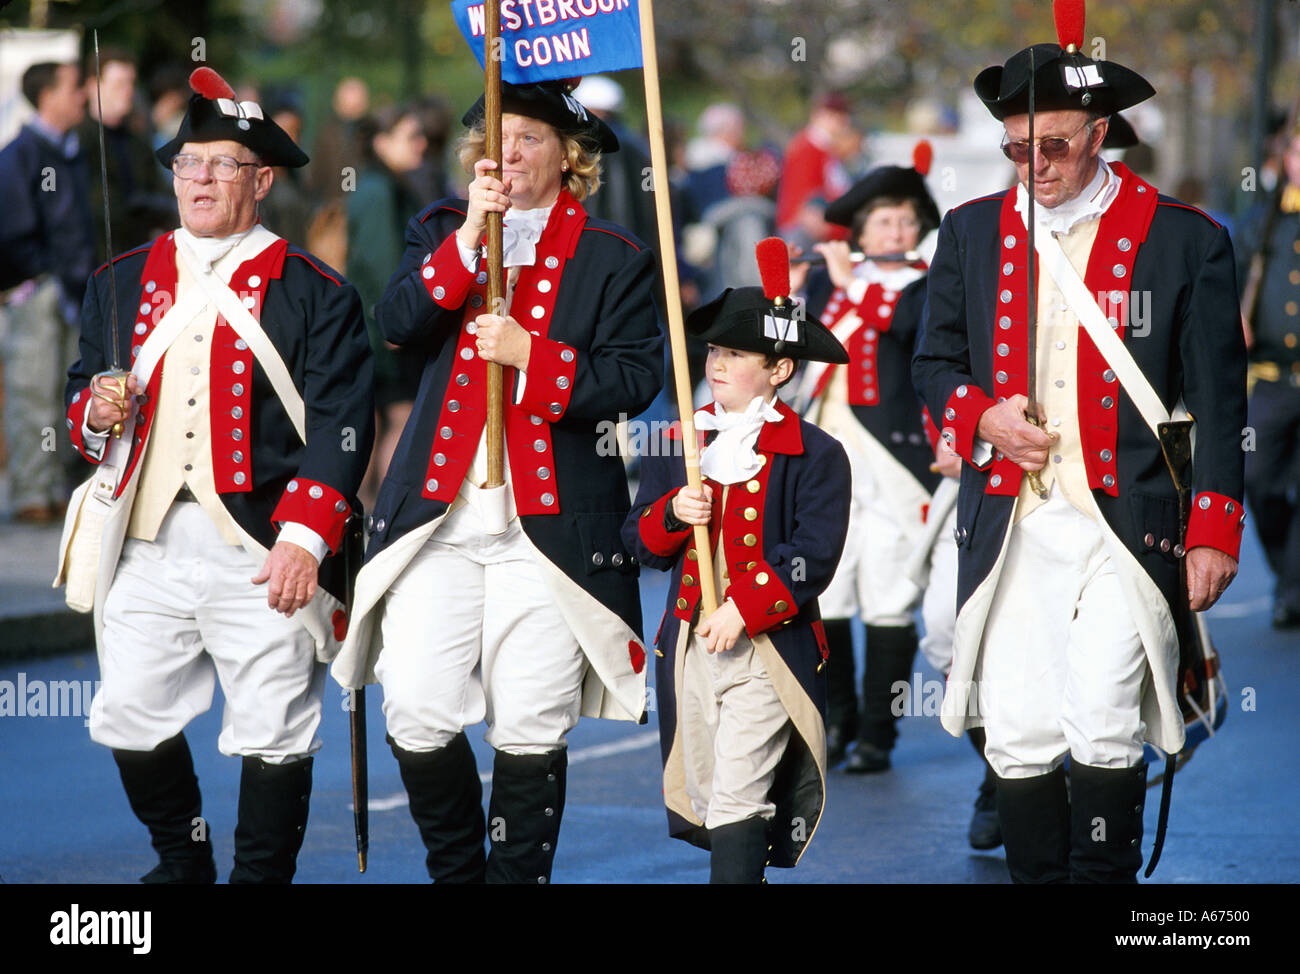 Men and a boy dressed in Revolutionary War costumes march in Veterans Day parade Stock Photo